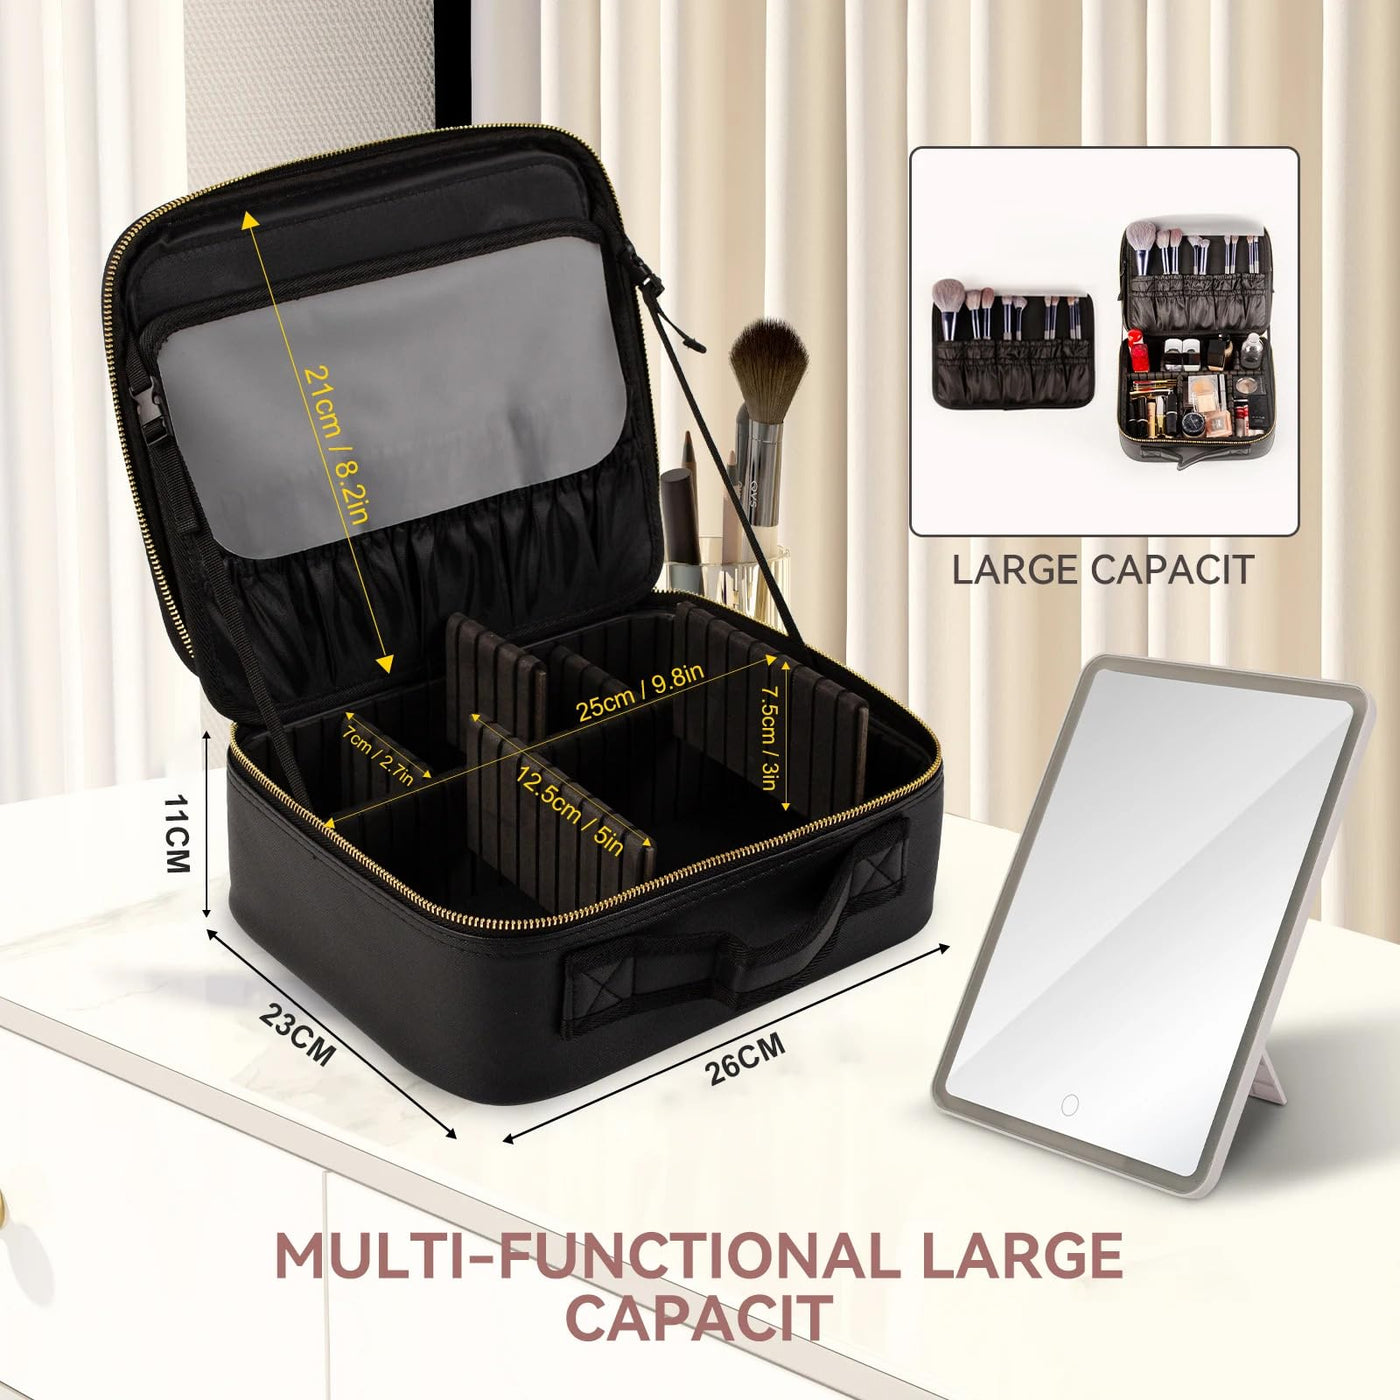 Makeup Bag with Lighted Mirror, Case Setting & Adjustable Dividers (Black)